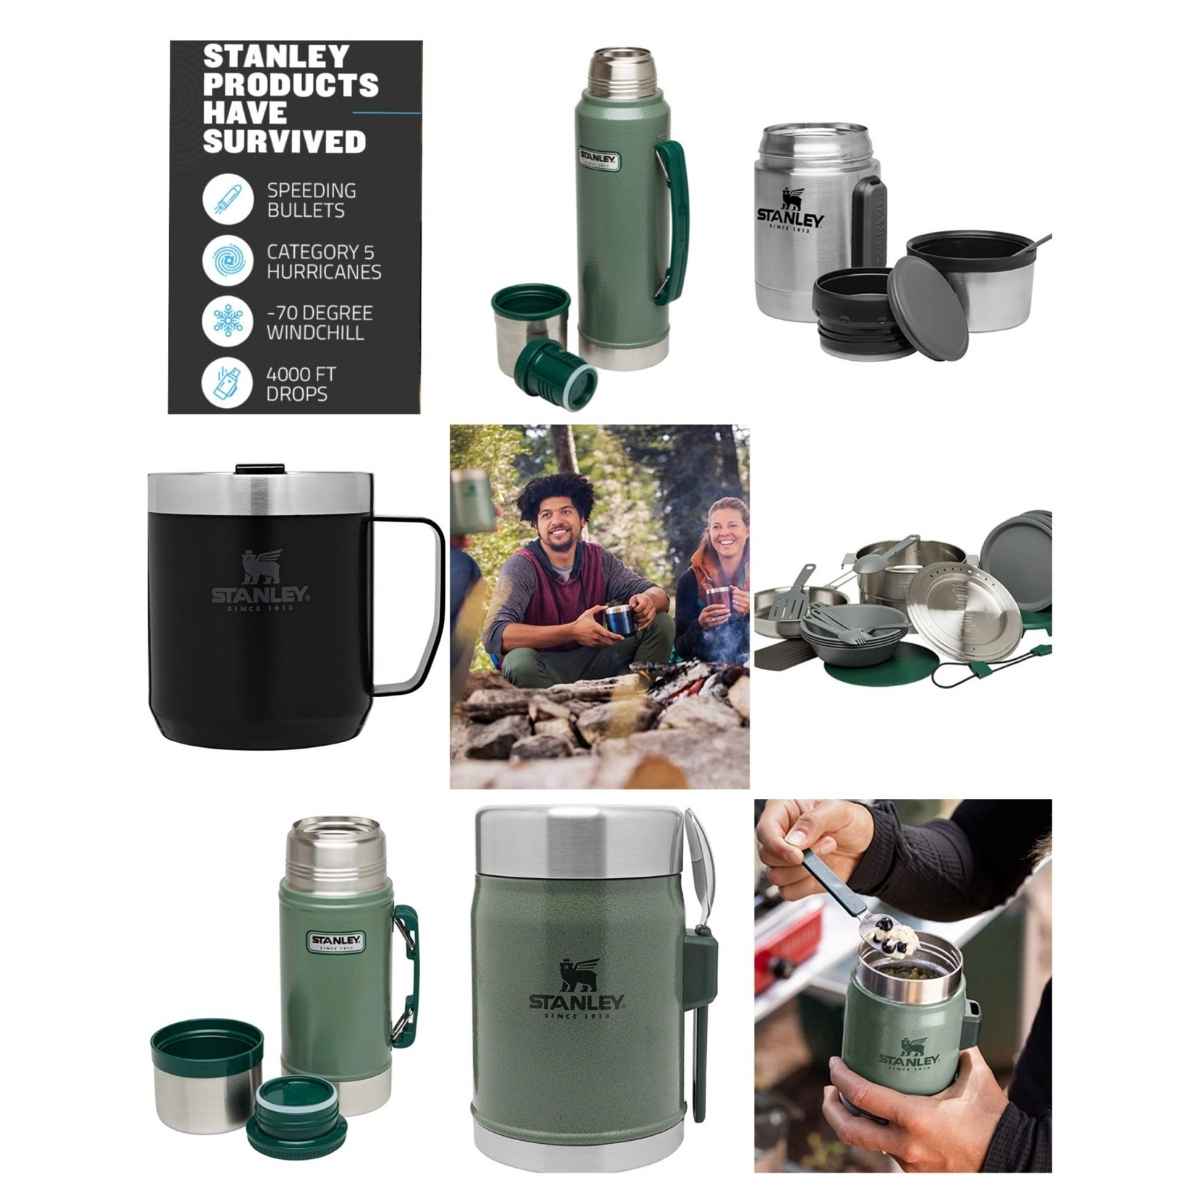 Today only deals on Stanley products at